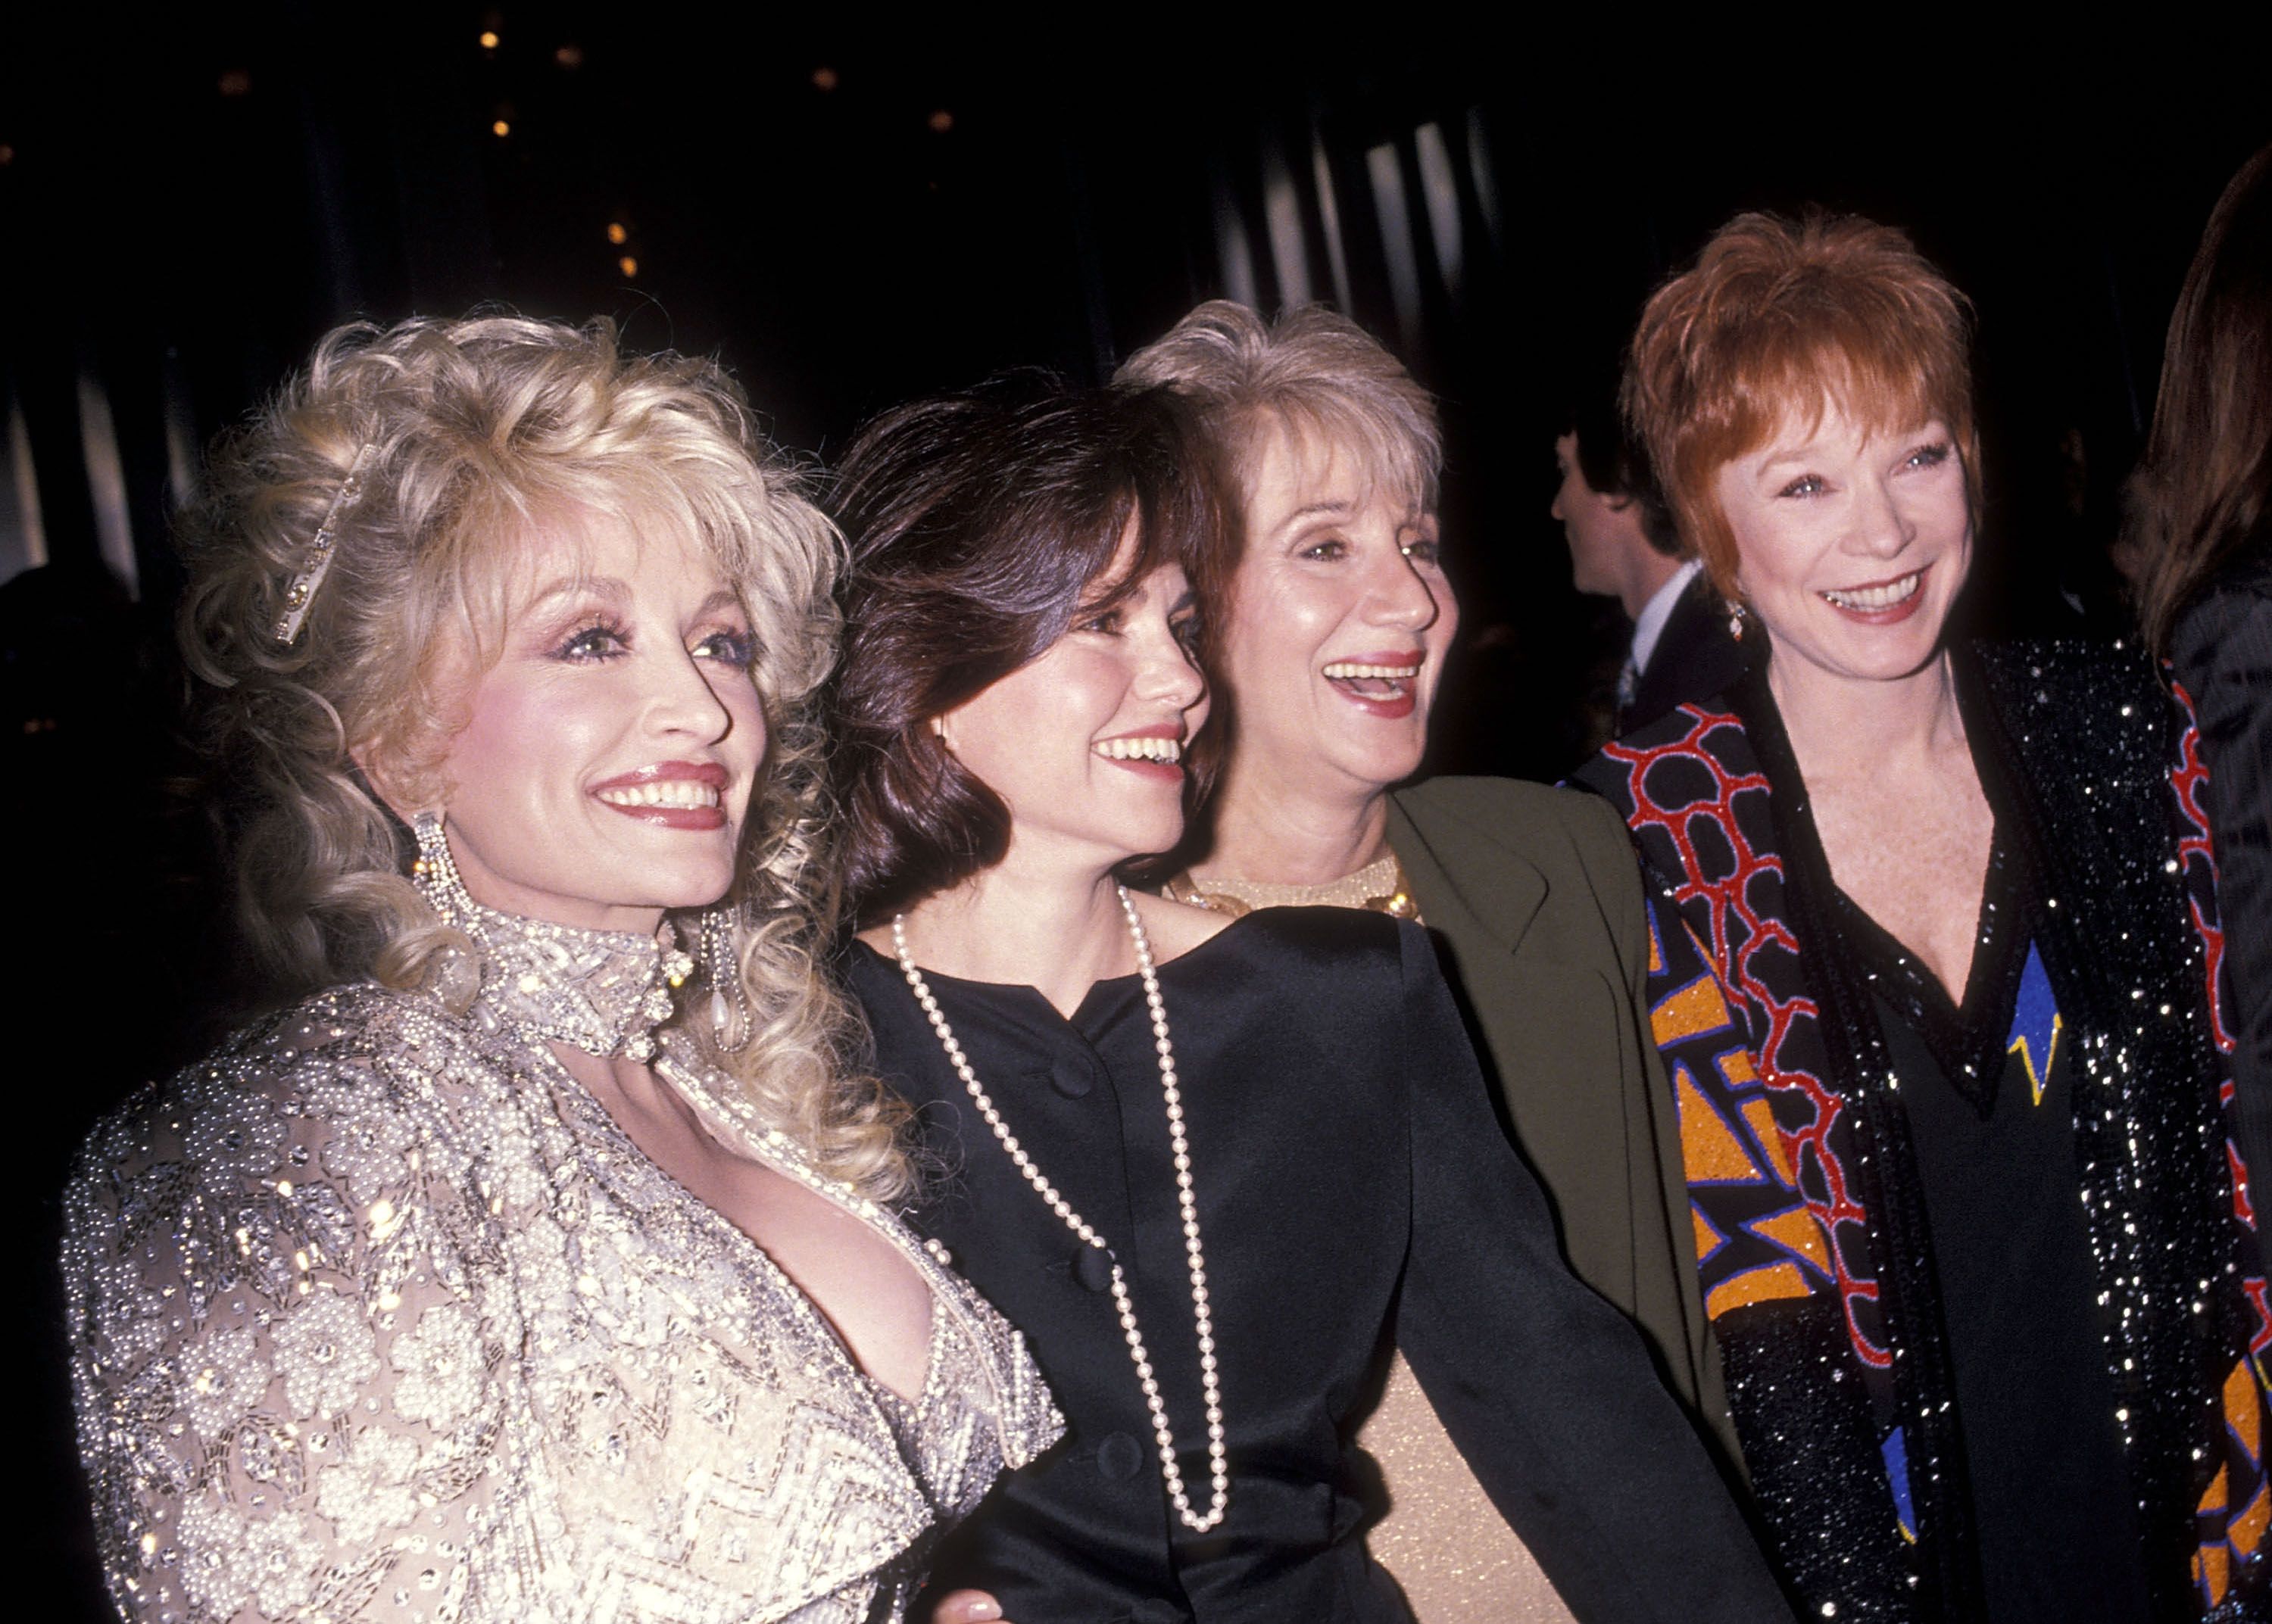 Dolly Parton, Sally Field, Olympia Dukakis and Shirley MacLaine at the "Steel Magnolias" New York City Premiere on November 5, 1989 | Getty Images